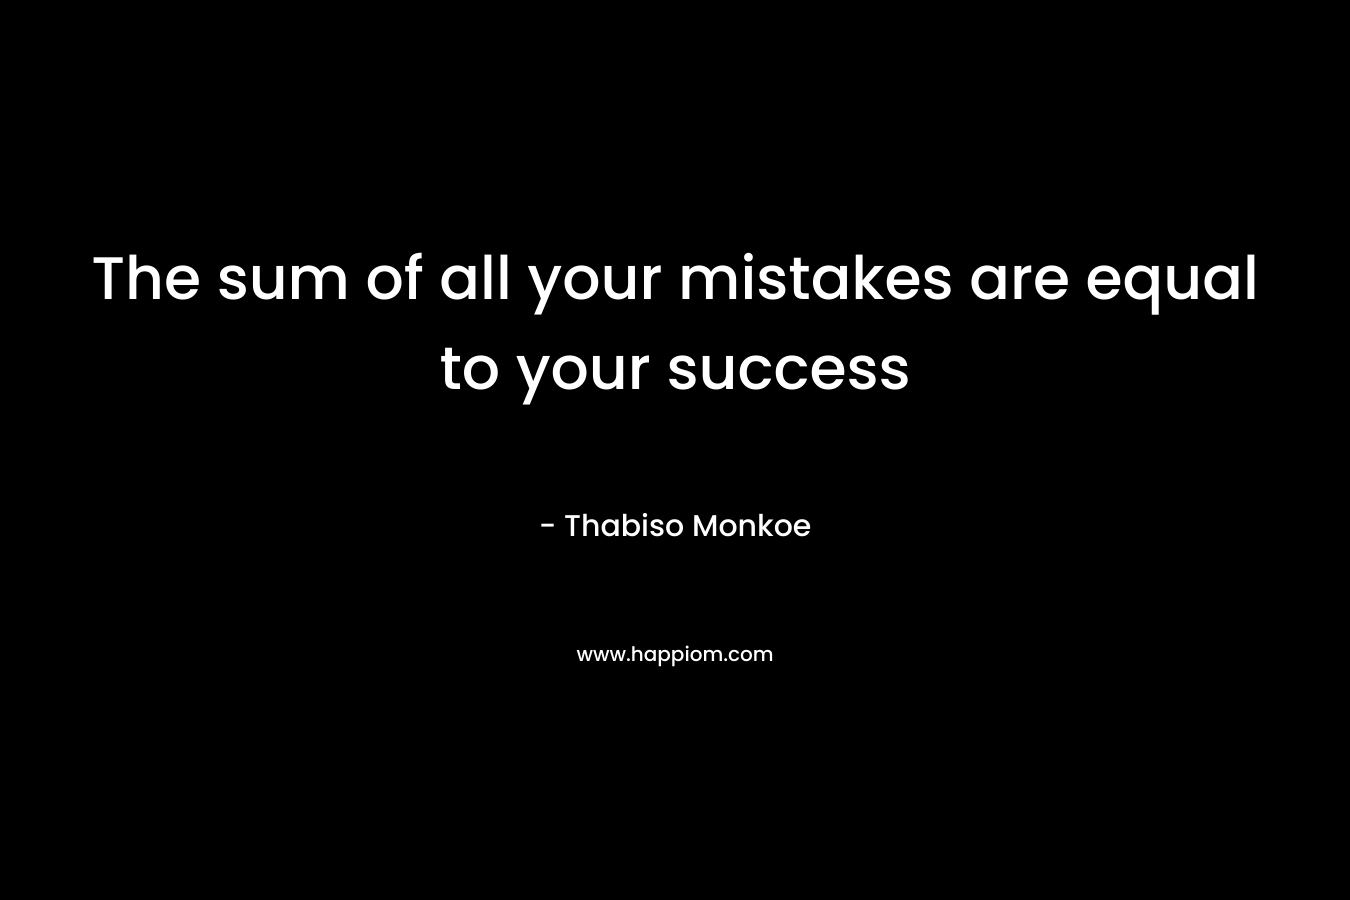 The sum of all your mistakes are equal to your success